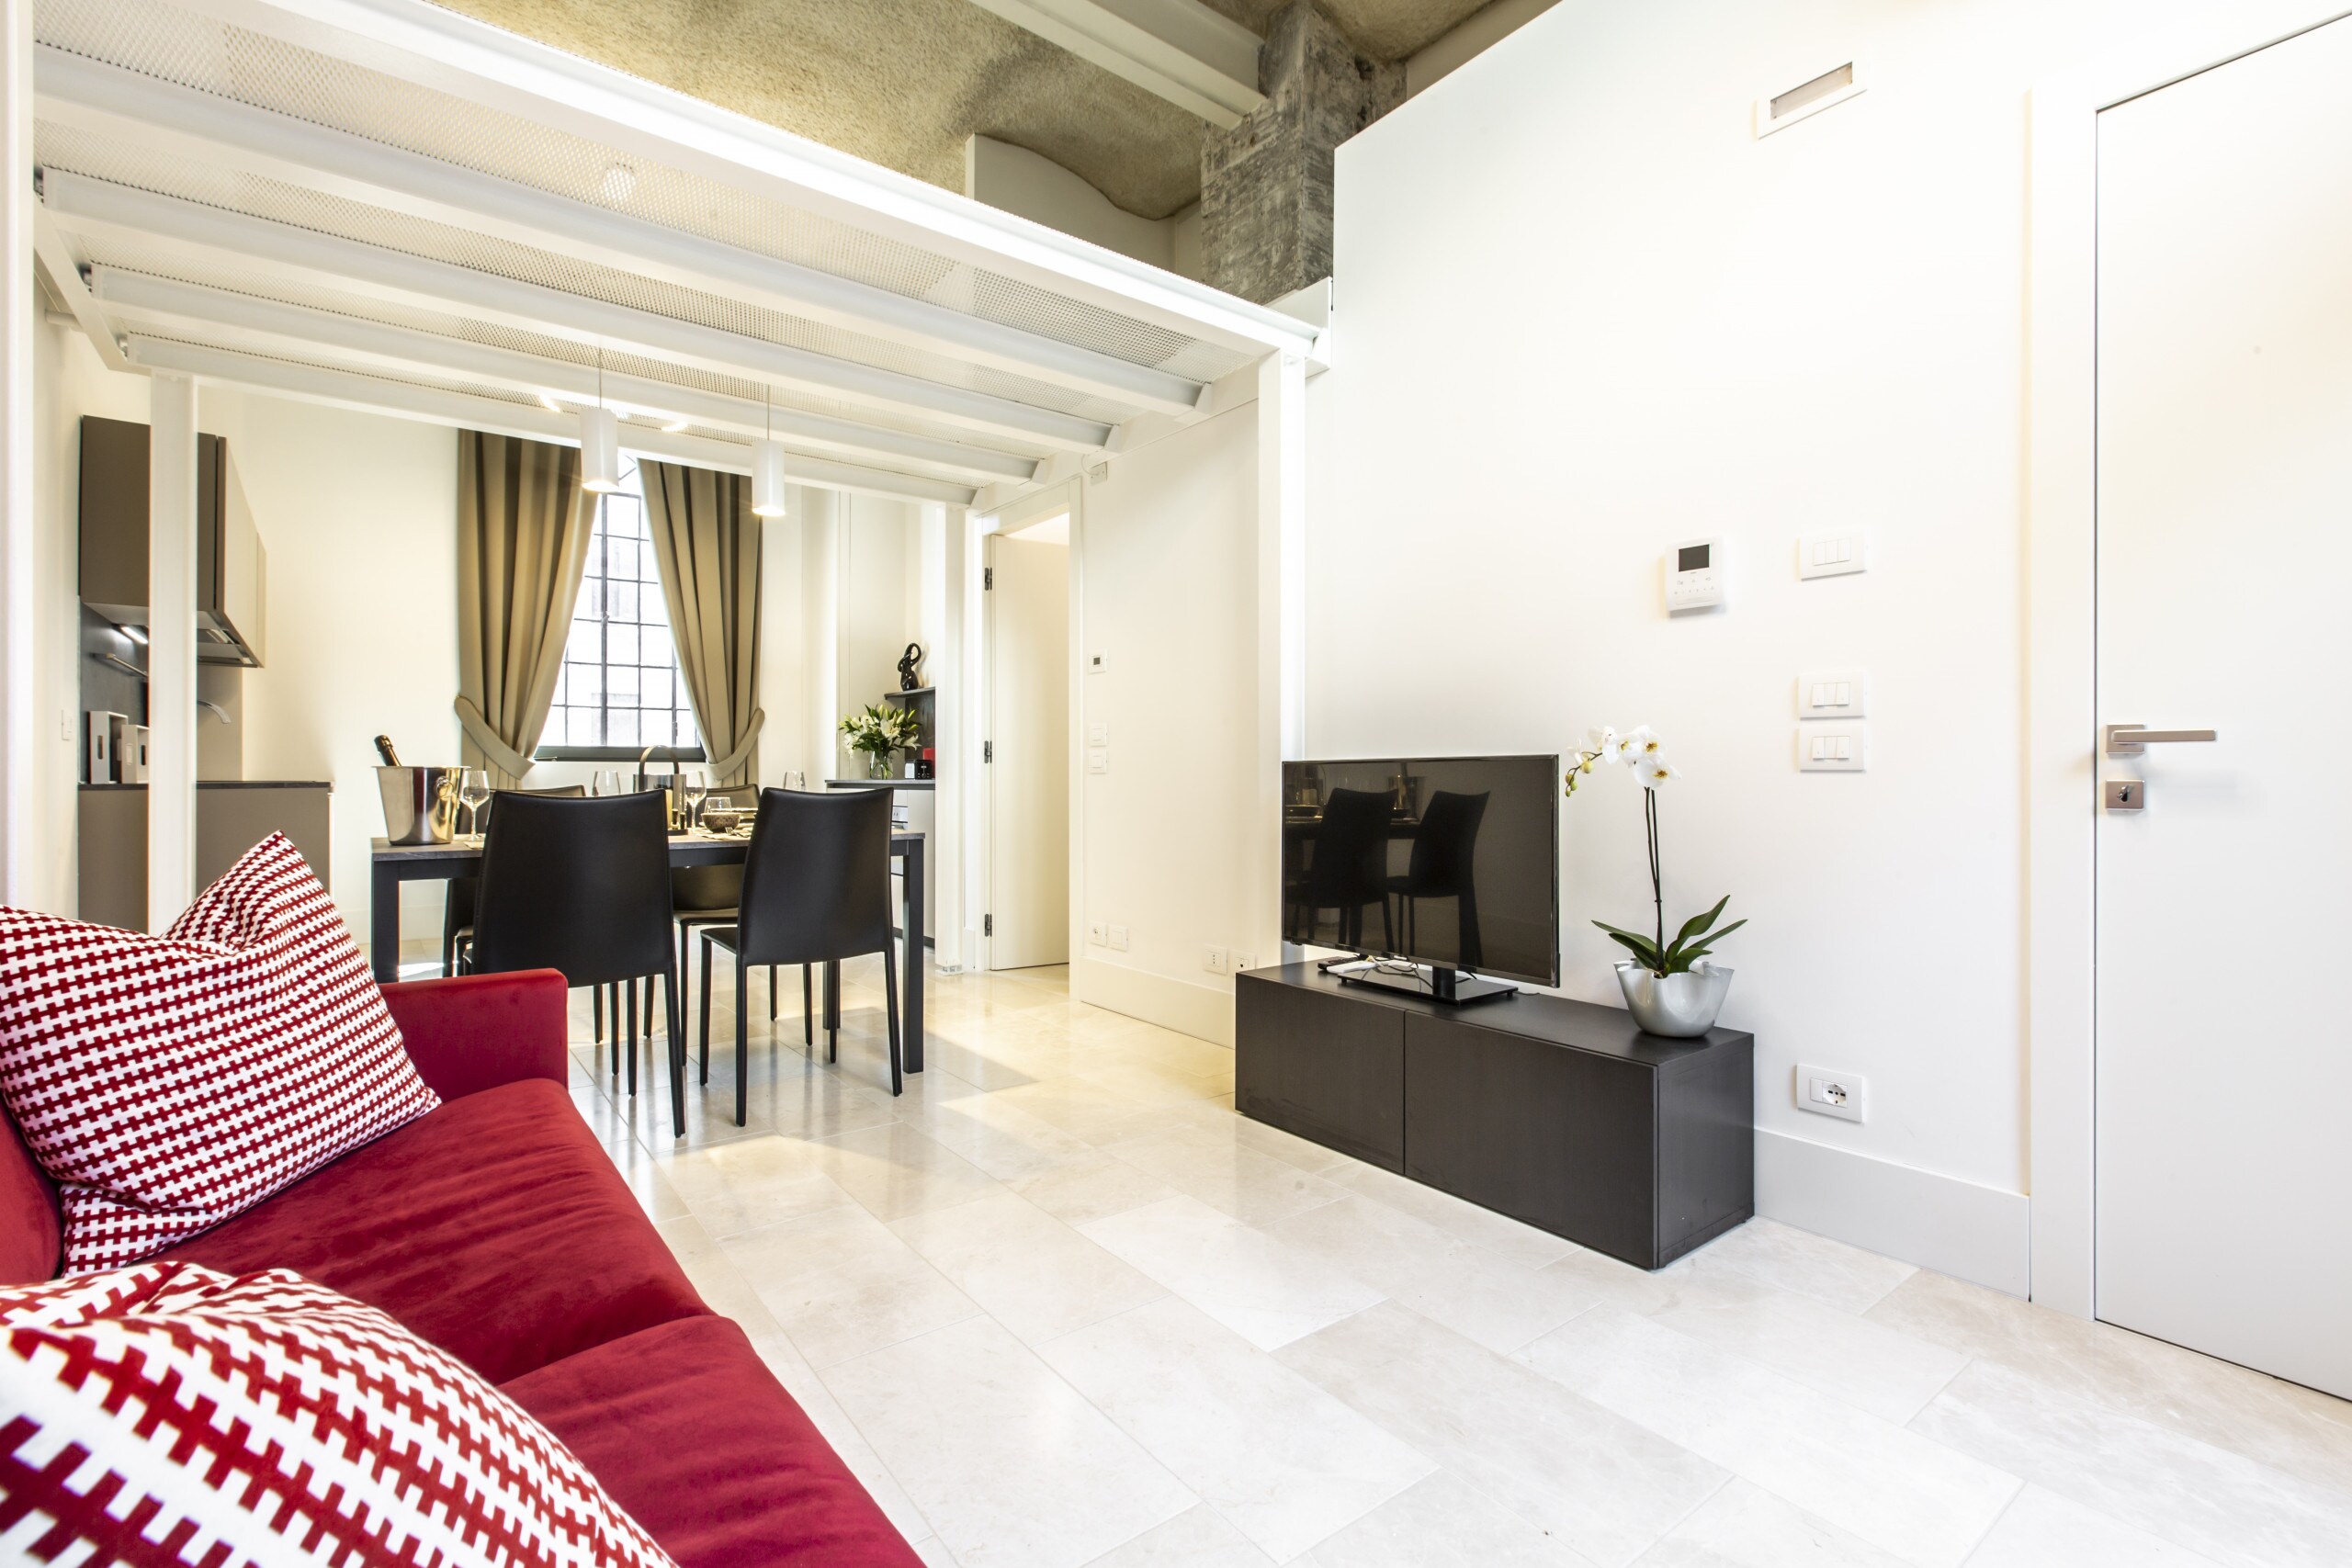 Property Image 1 - Attractive & elegant 2-bedroom apartment located in a residential area of Venice